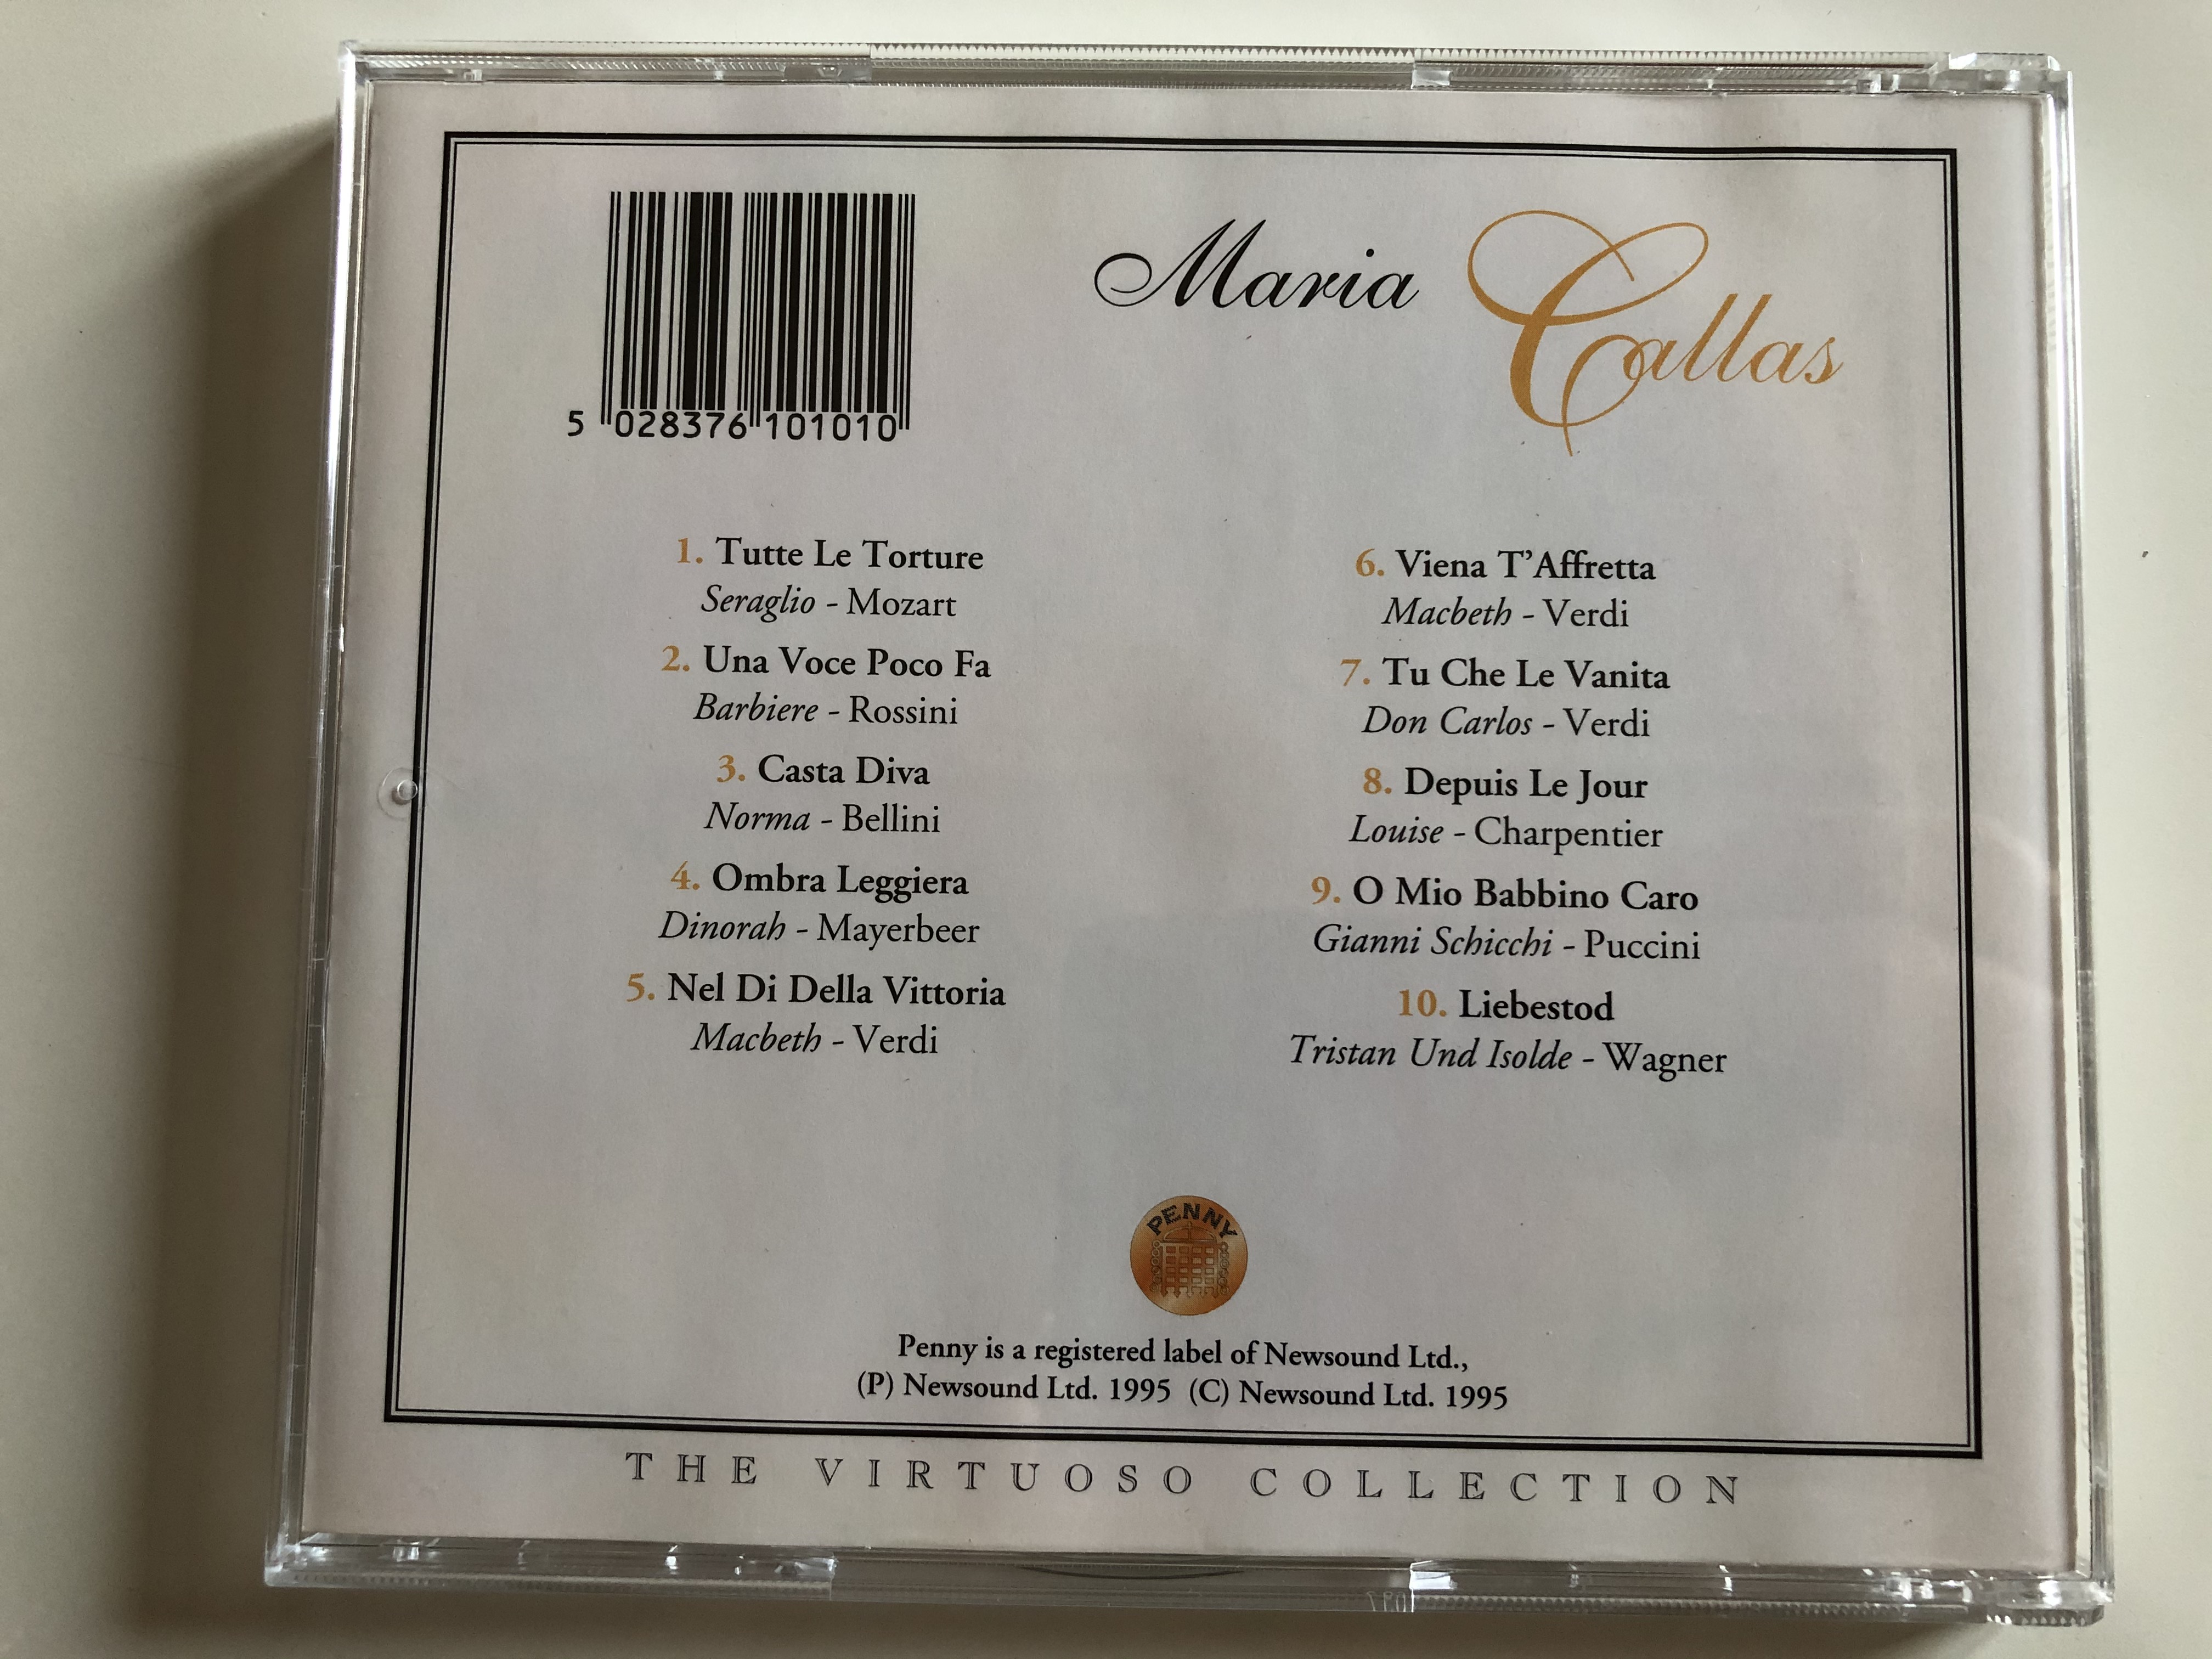 maria-callas-the-virtuoso-collection-essential-opera-highlights-penny-audio-cd-1995-pncd-0101-4-.jpg